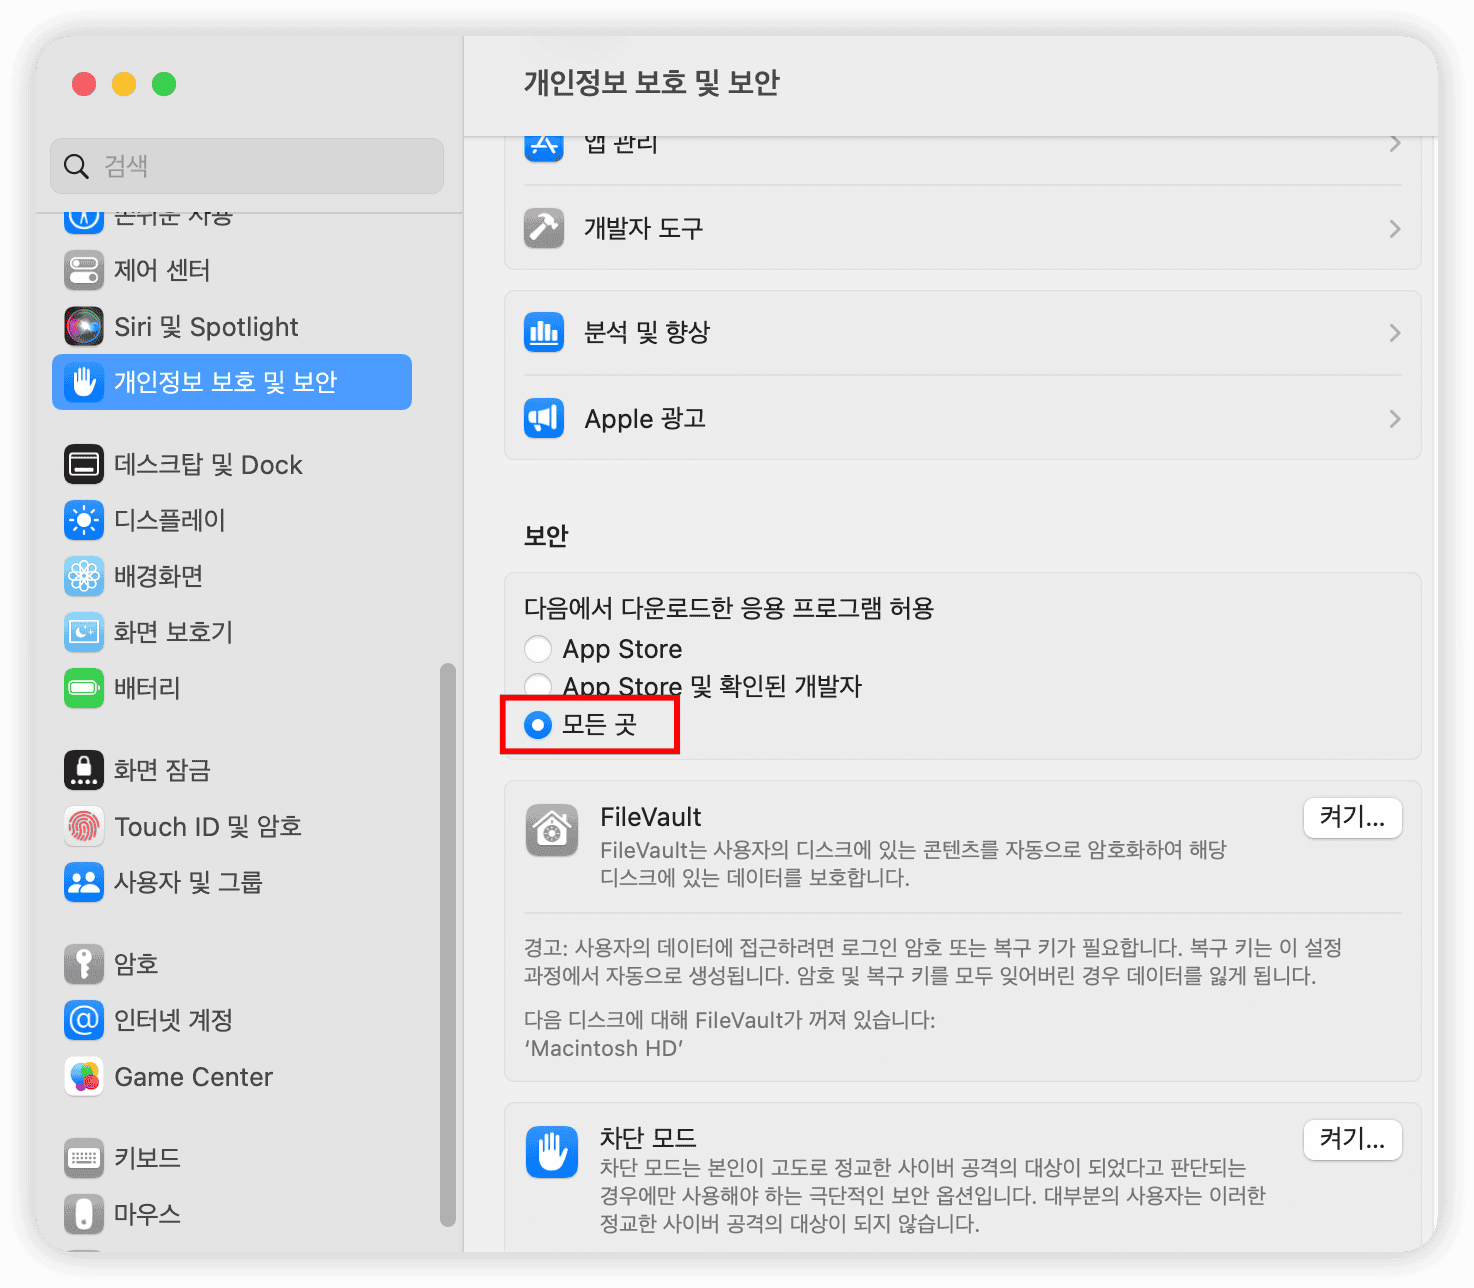 allow-applications-downloaded-from-anywhere-kr.png